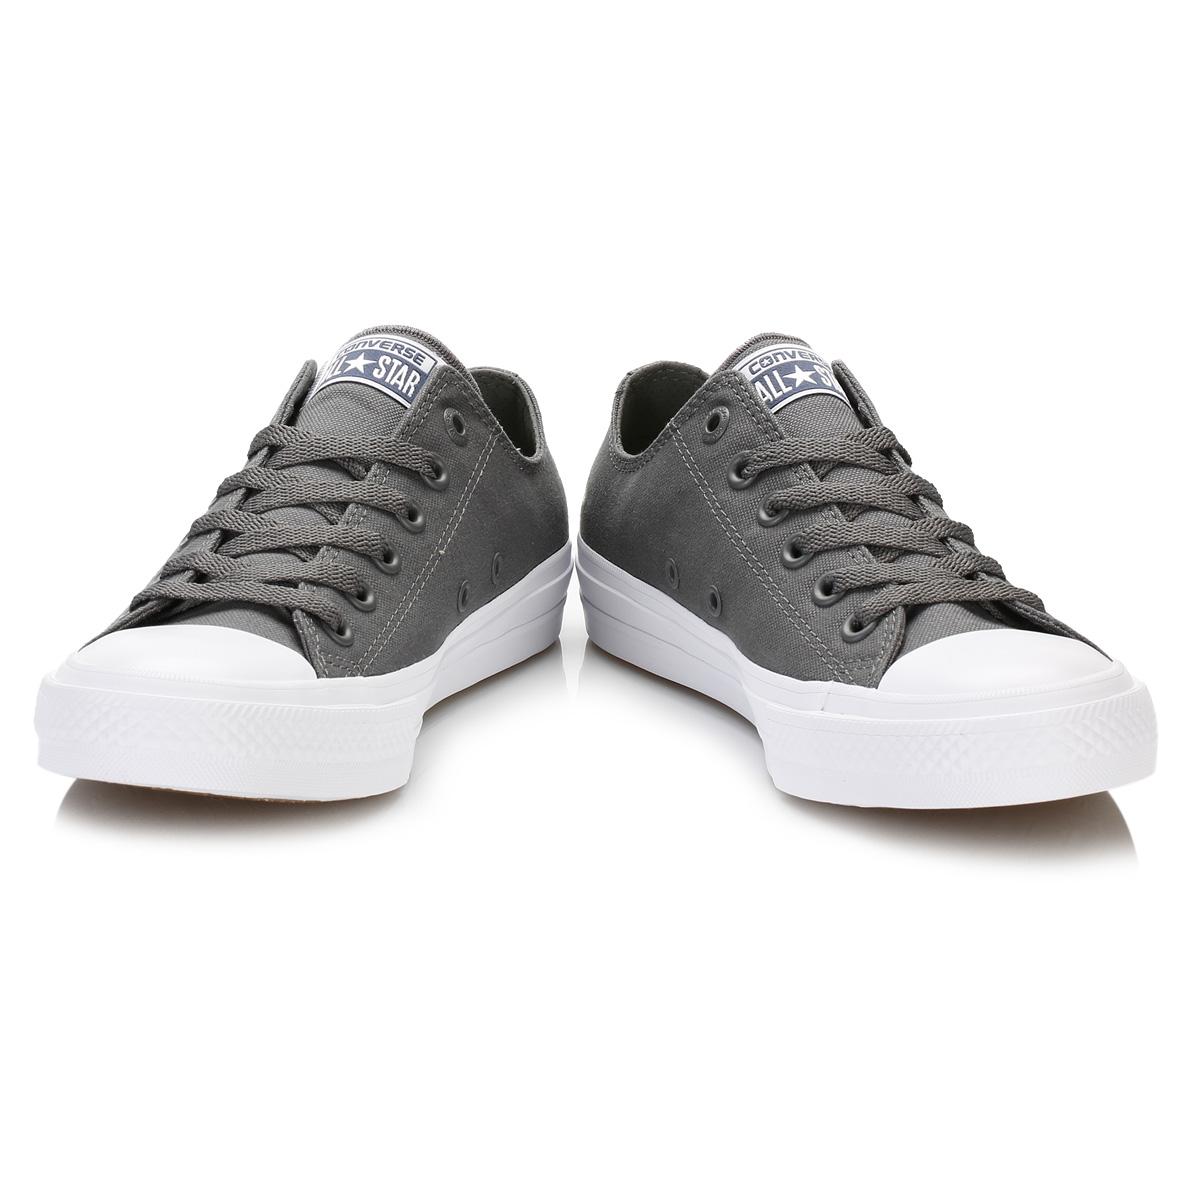 Converse All Star Grey Chuck Taylor Ii Thunder Trainers in Gray - Lyst